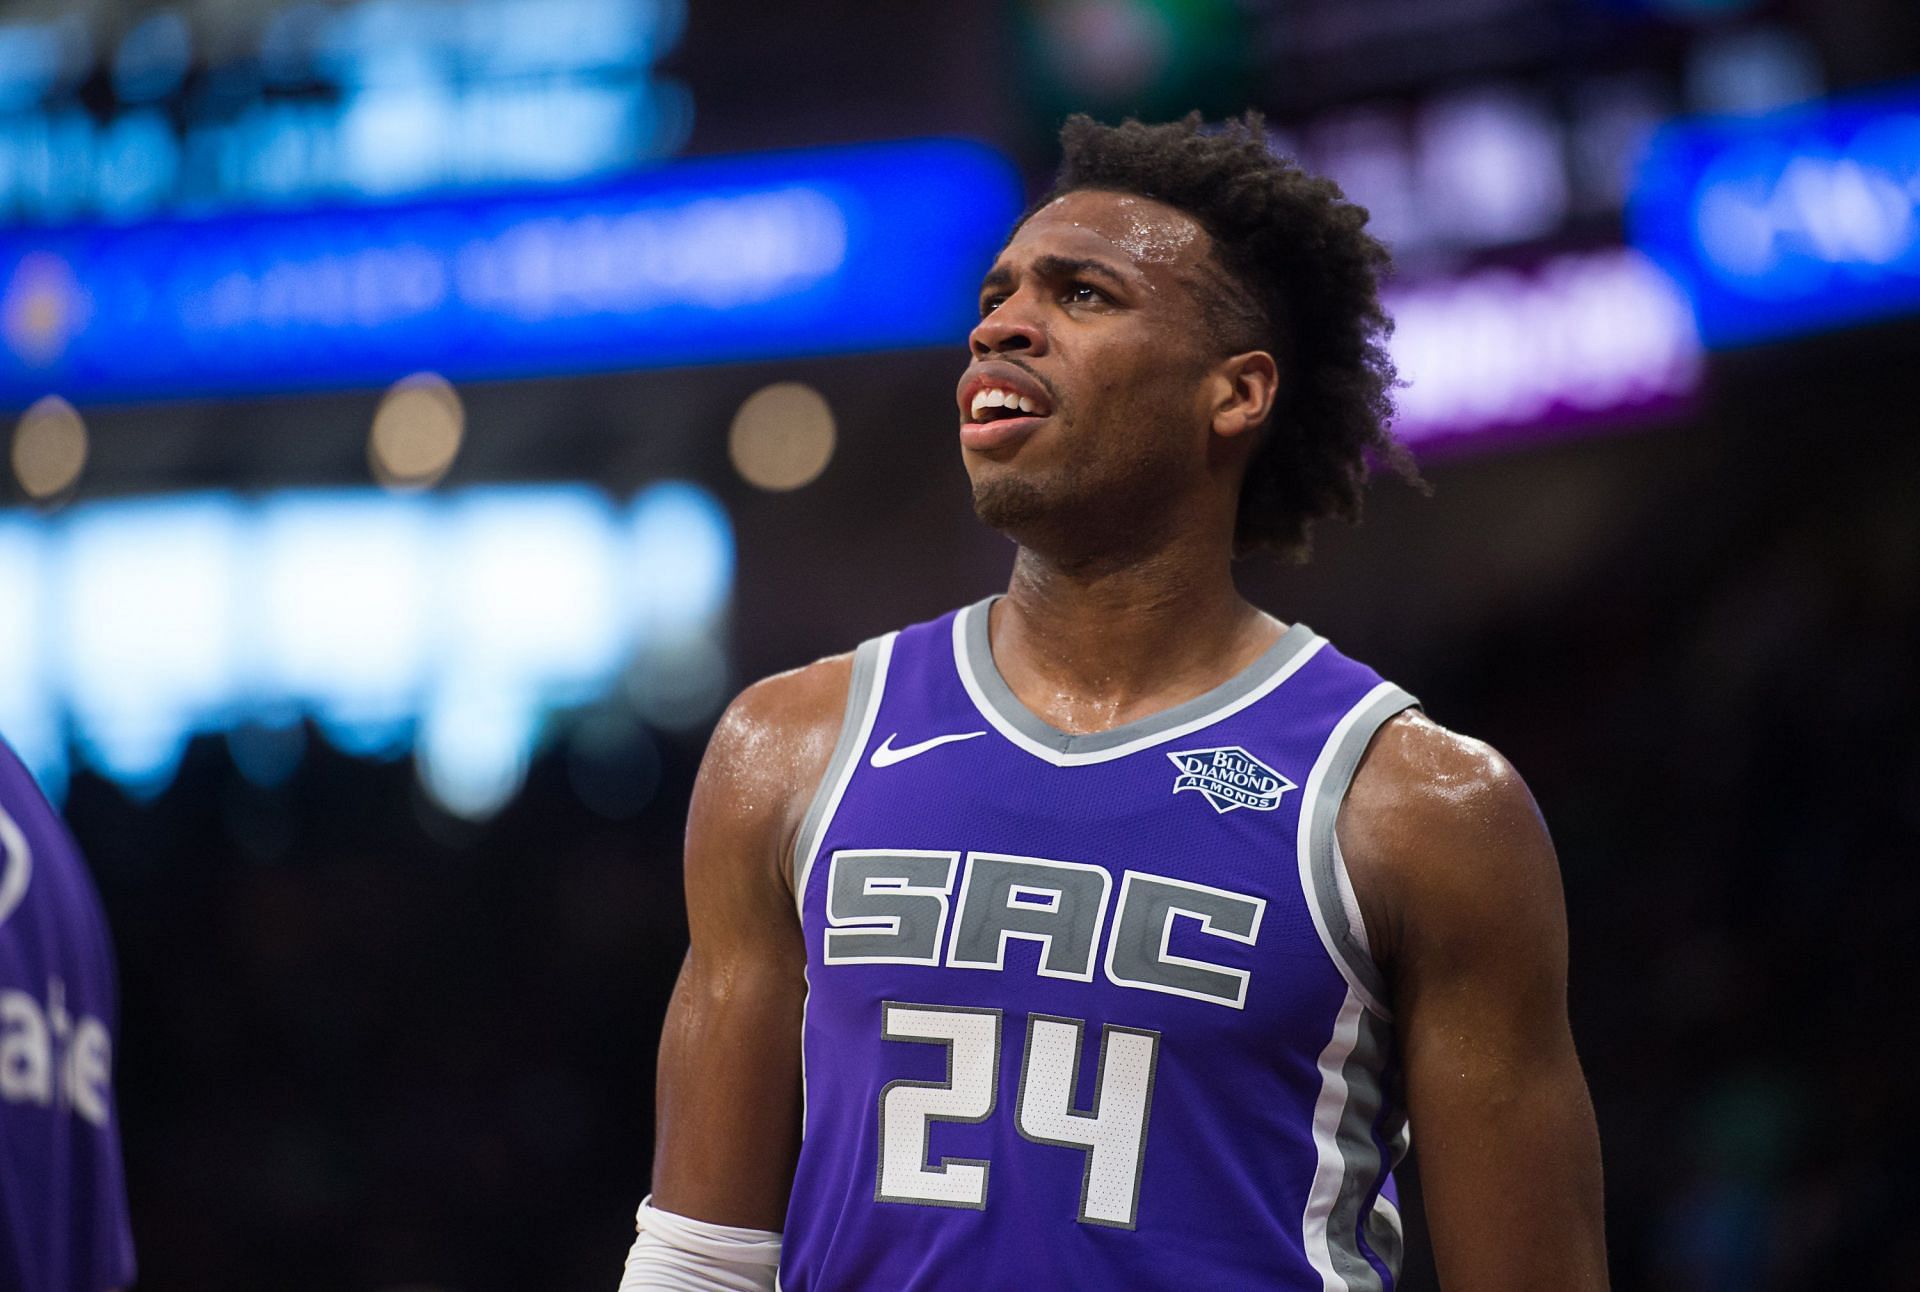 Sacramento Kings Buddy Hield makes his debut on the Sixth Man of the Year rankings